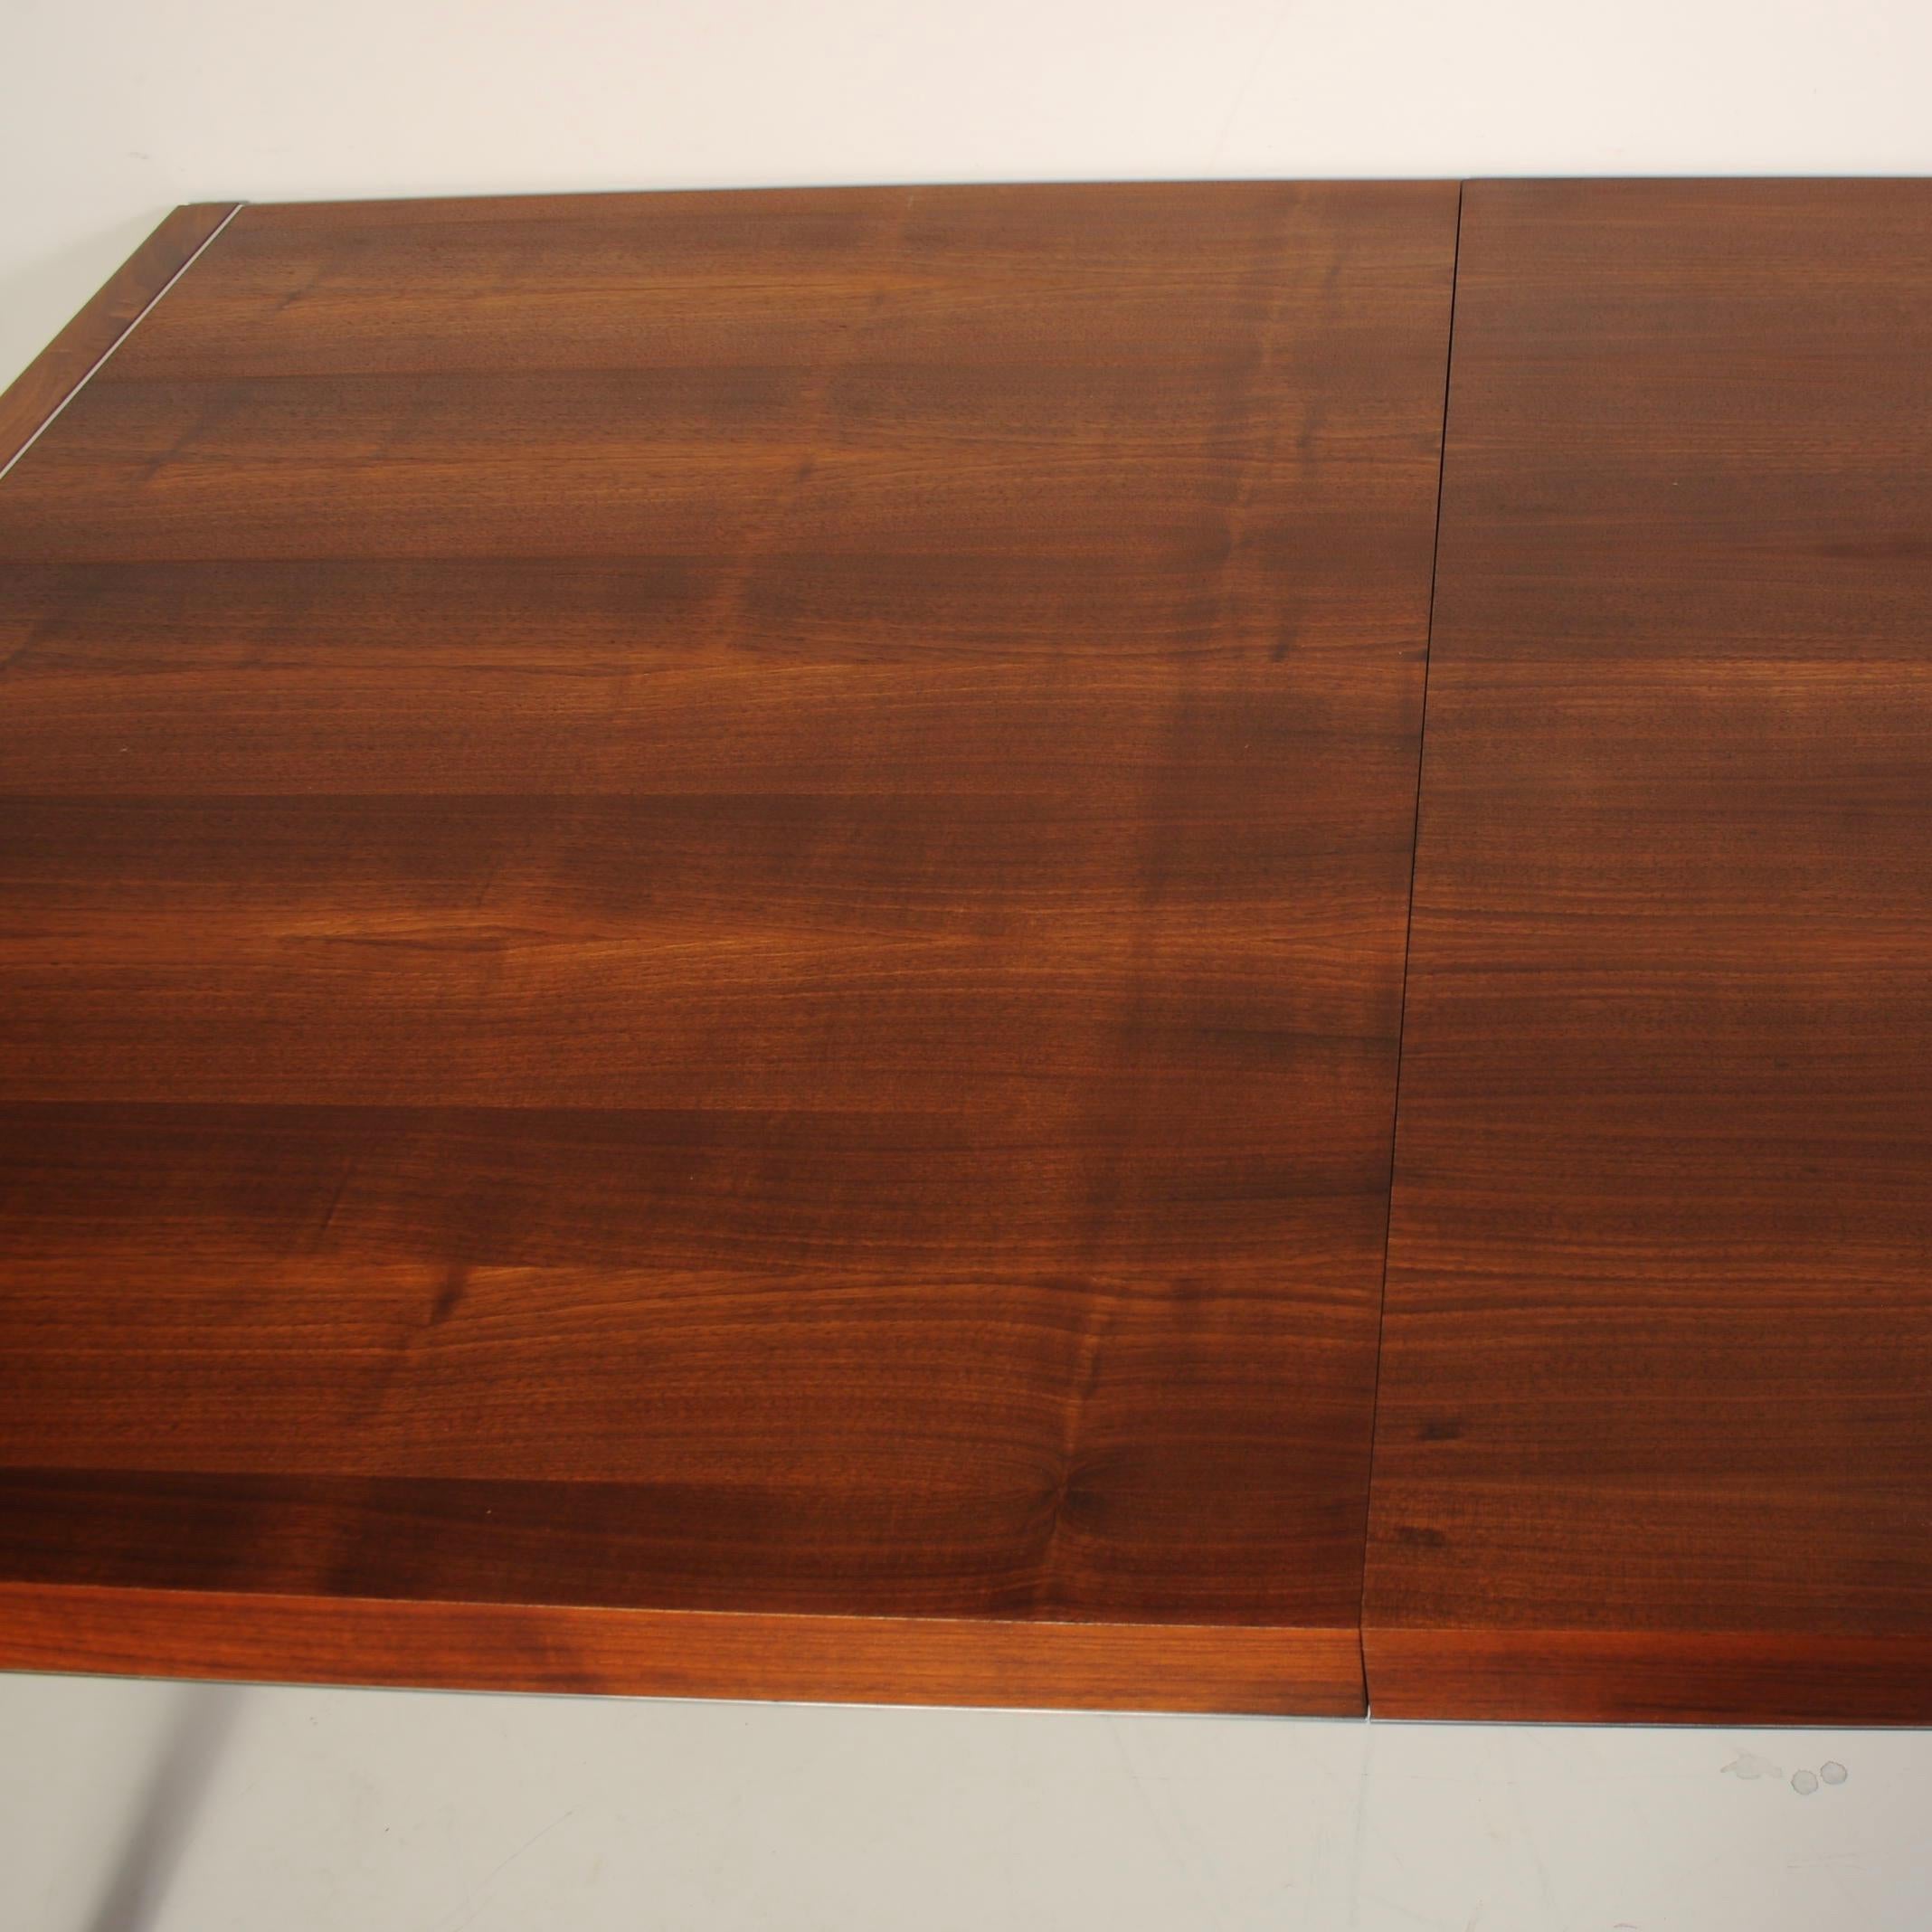 20th Century Mid-Century Modern Style Walnut and Stainless Steel Parsons Dining Table